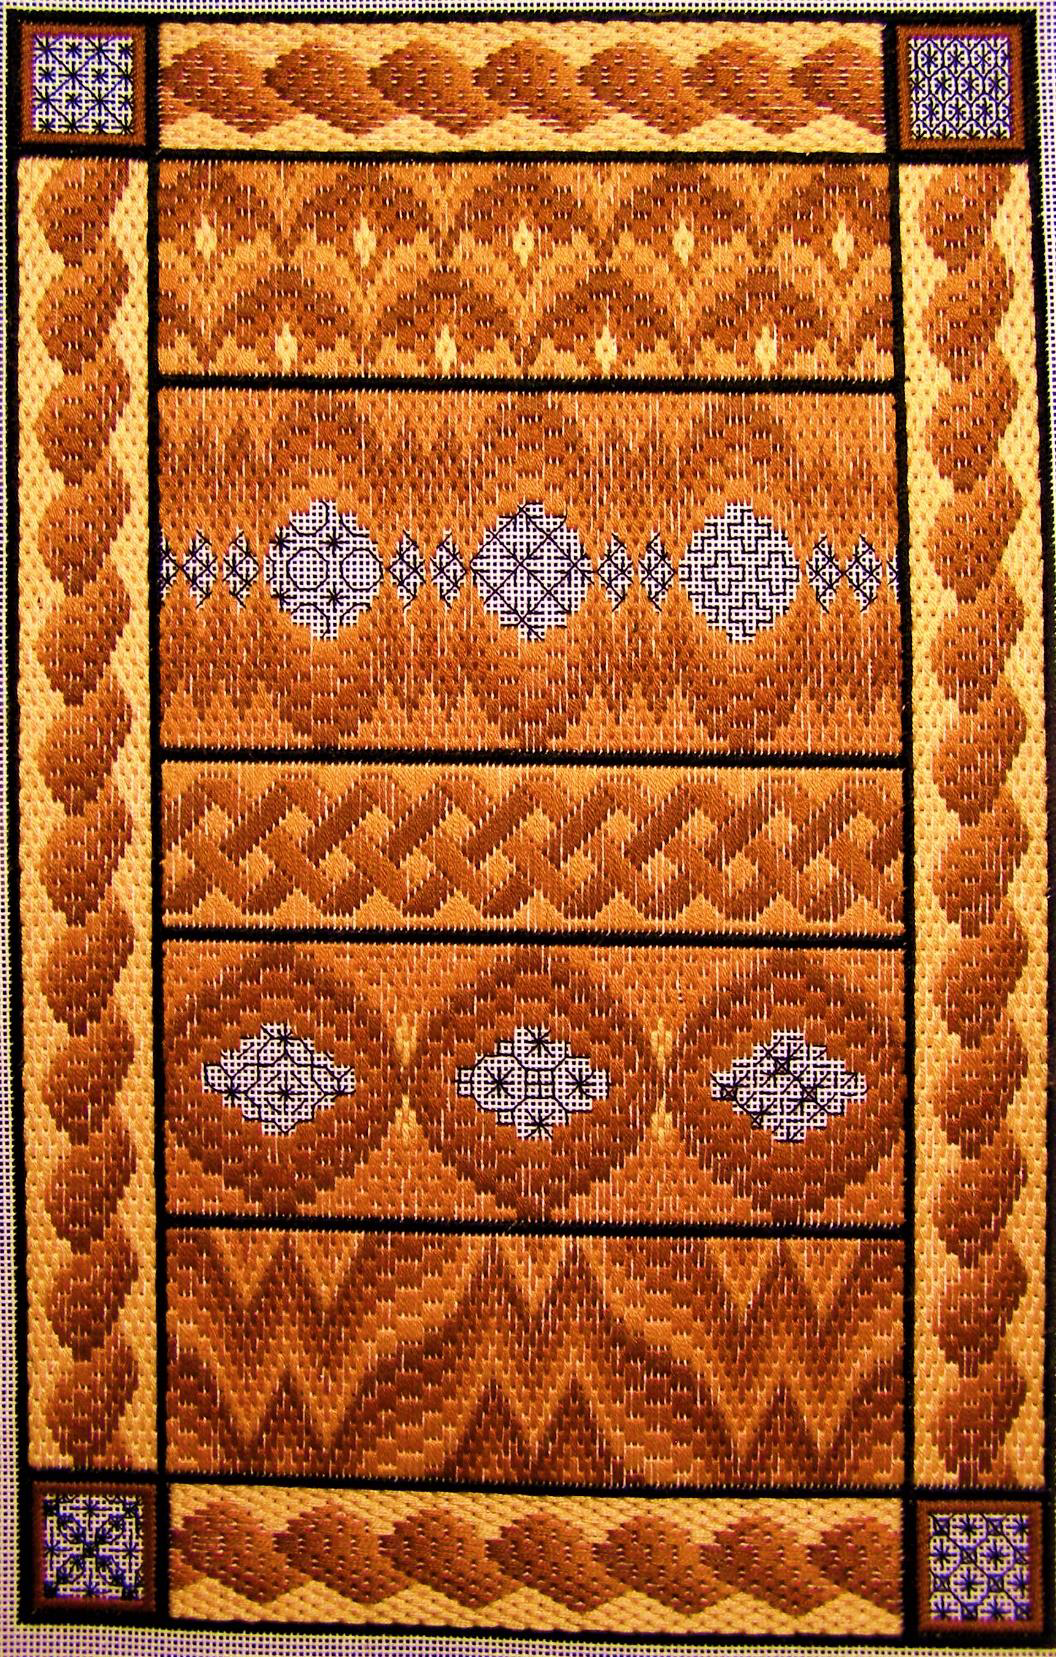 Inland Empire Chapter offers Florentine Sampler pattern for purchase